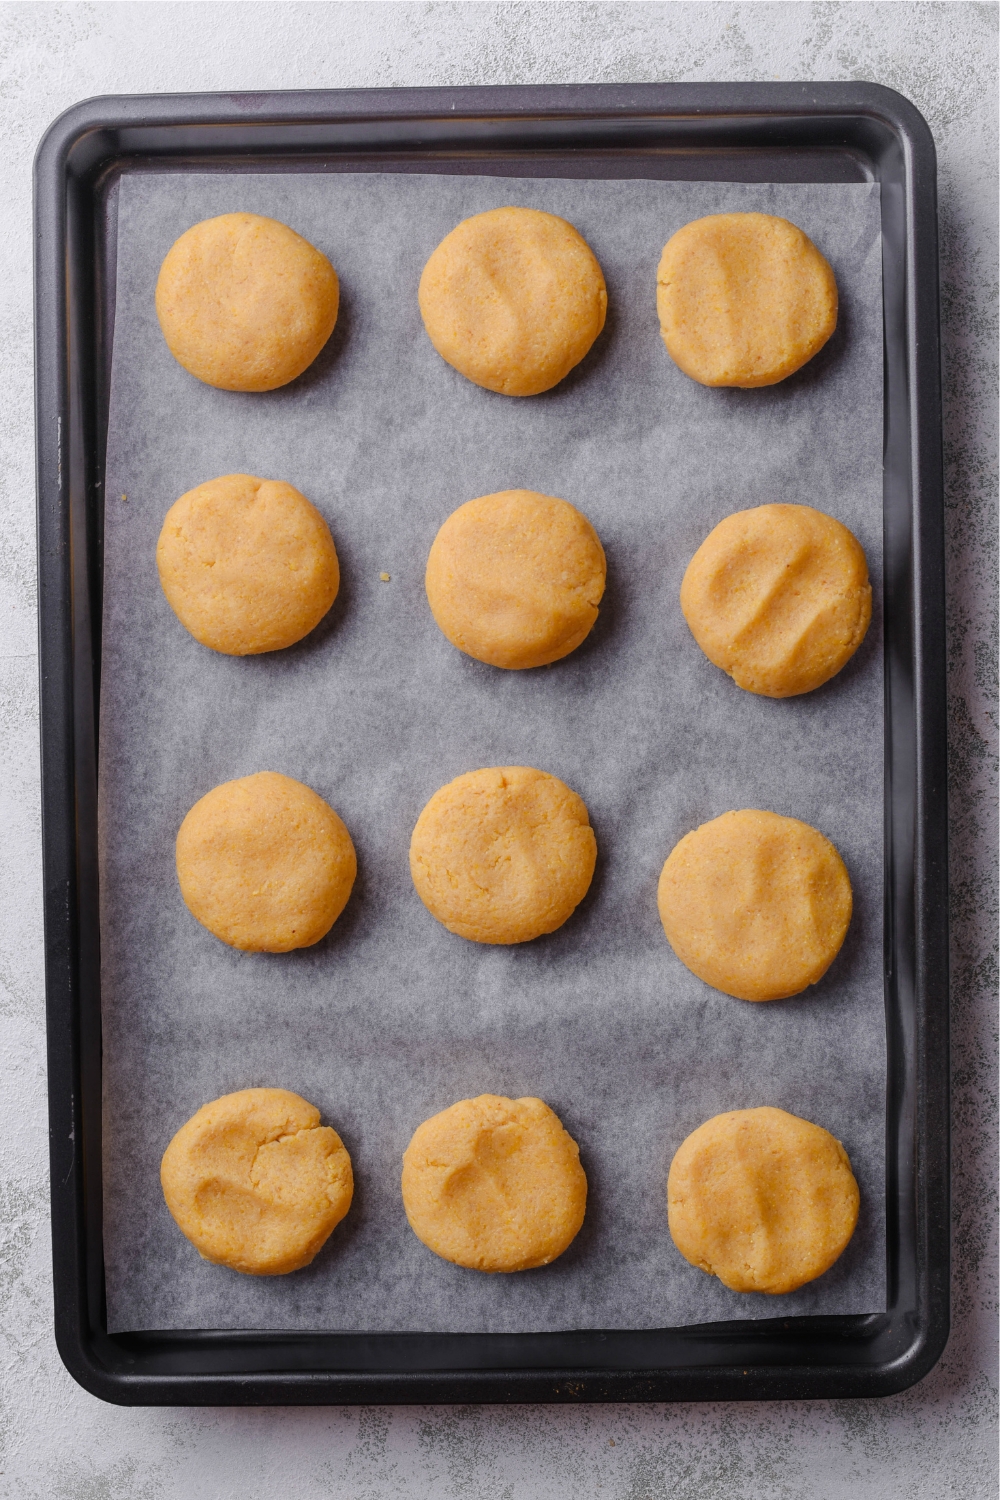 One dozen unbaked cookies spaced evenly on a baking sheet lined with parchment paper.